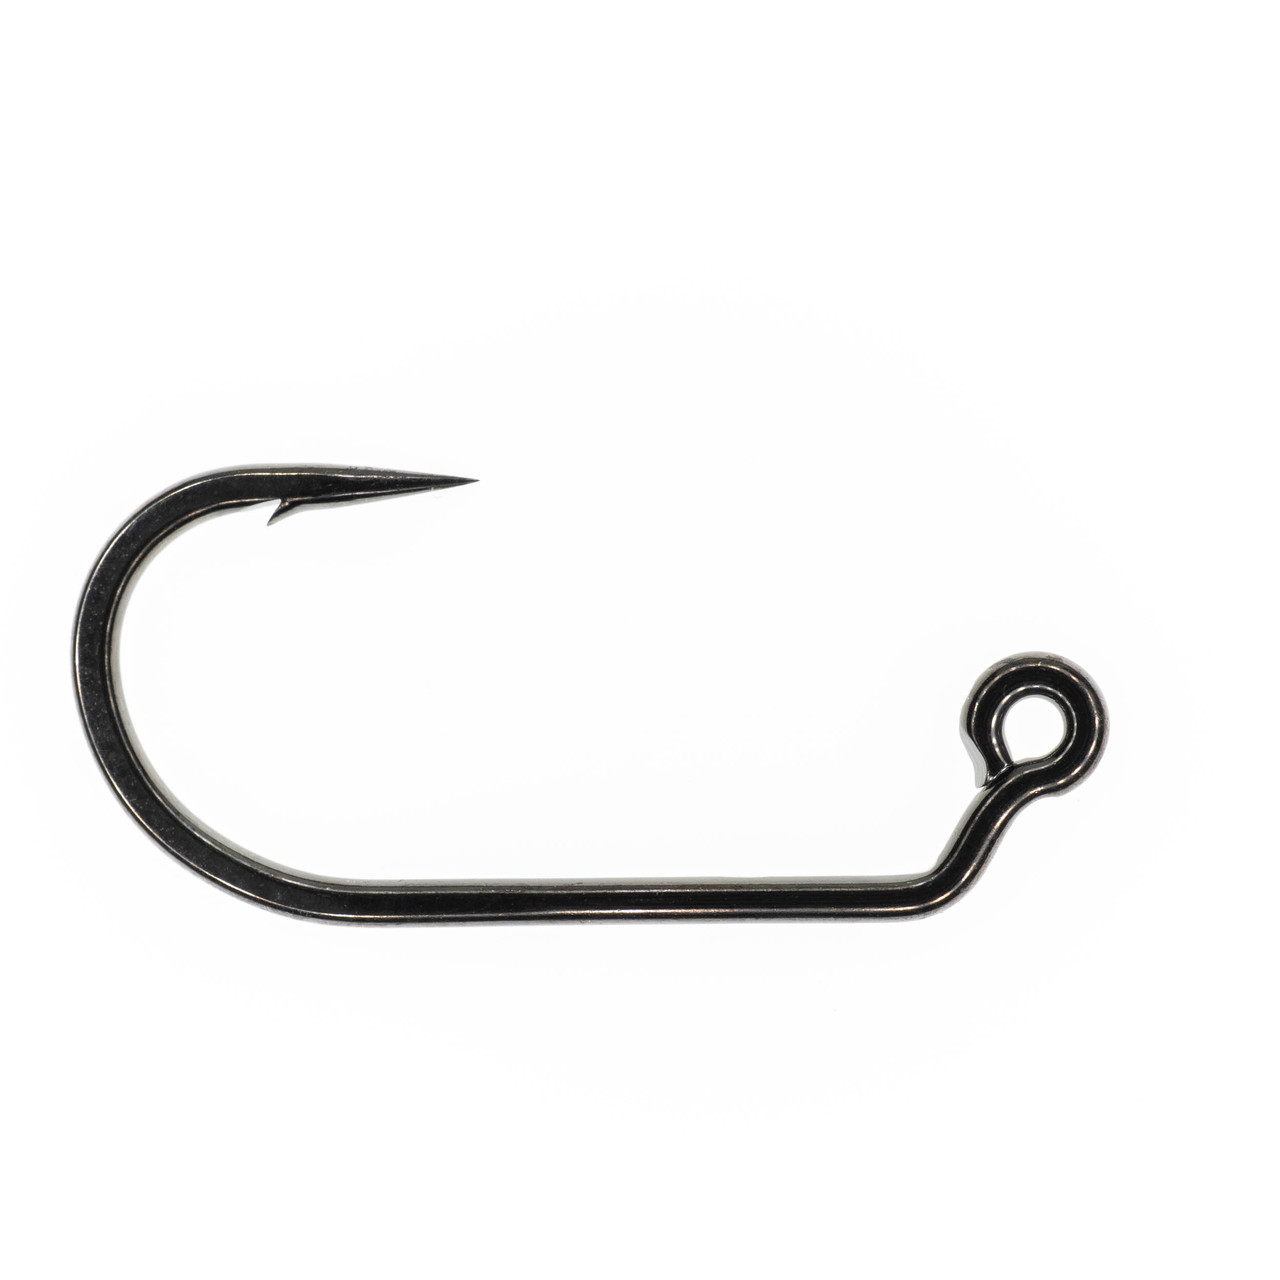 100 MUSTAD & SON #13 Fly Tying Sneck Hooks tdown tapered eye BRONZED NORWAY 3351